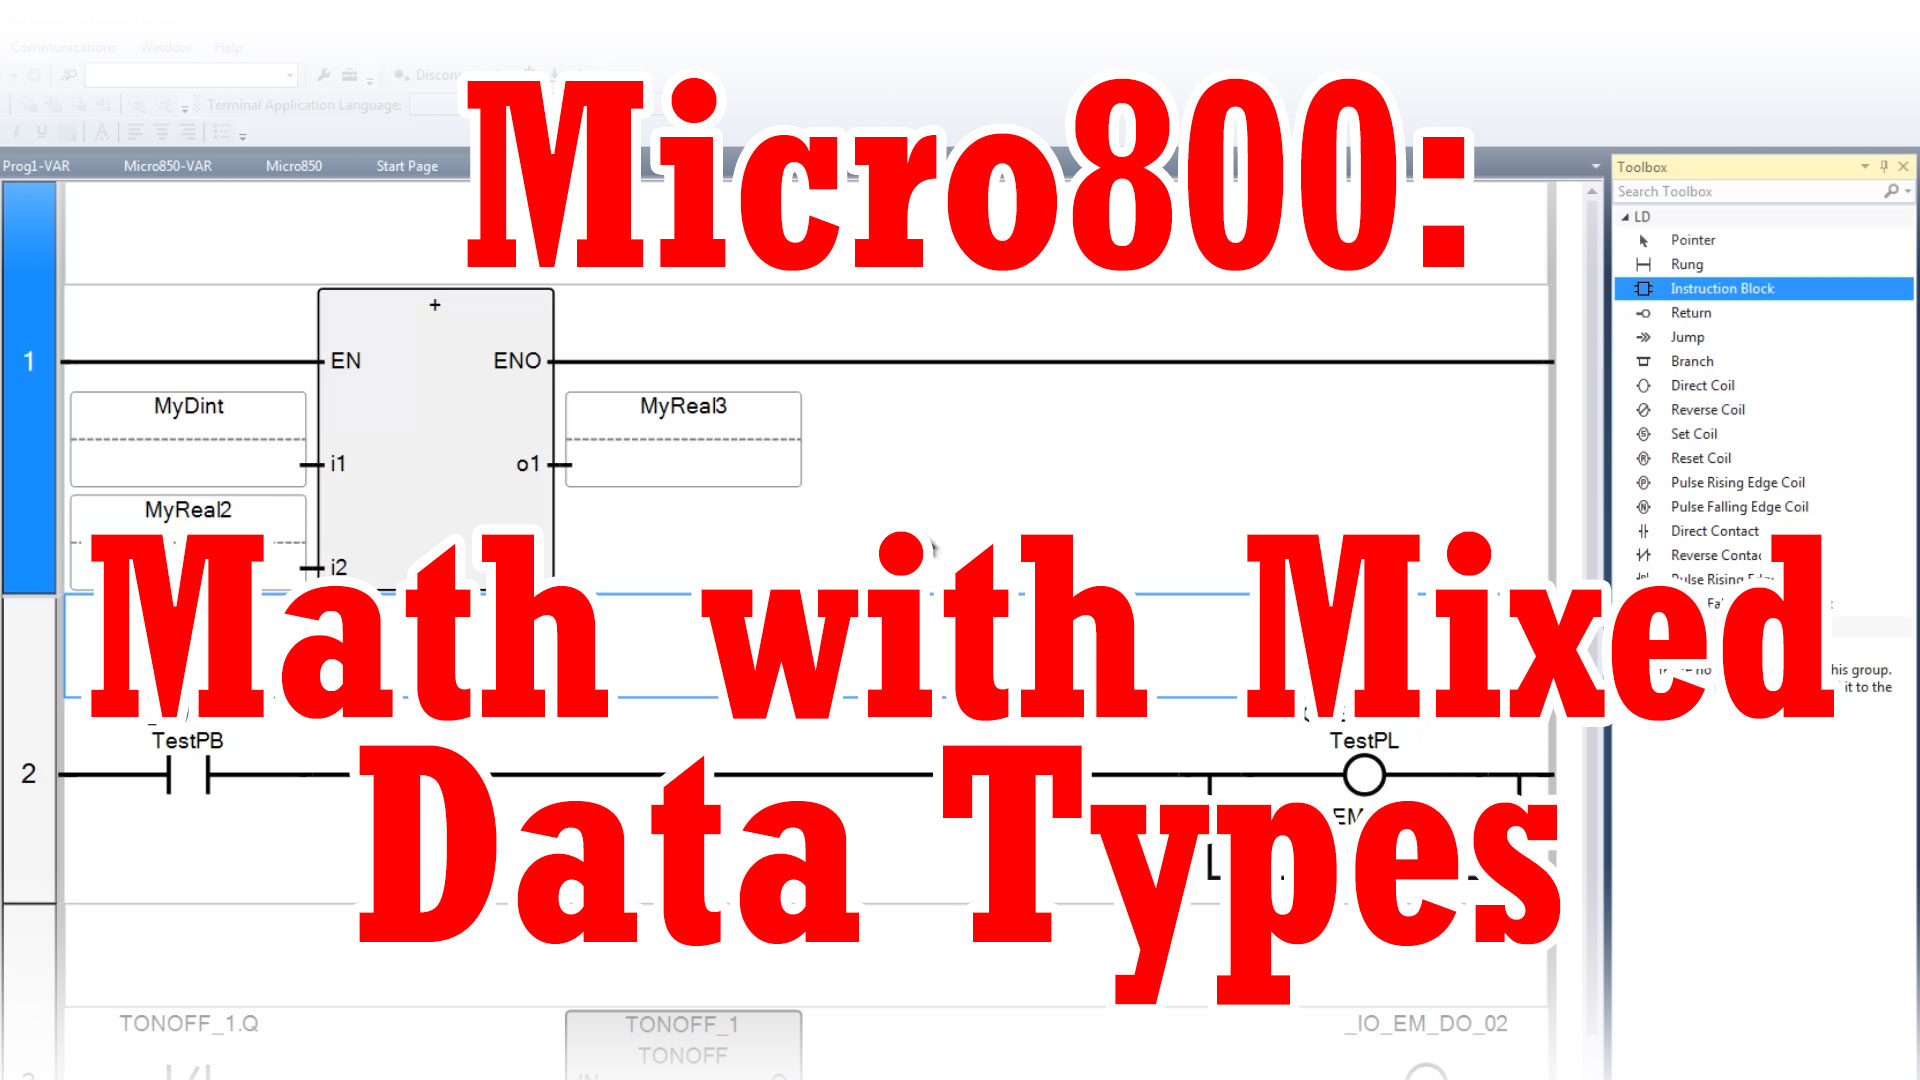 Micro800, CCW - Math with Mixed Data Types (M3E50)